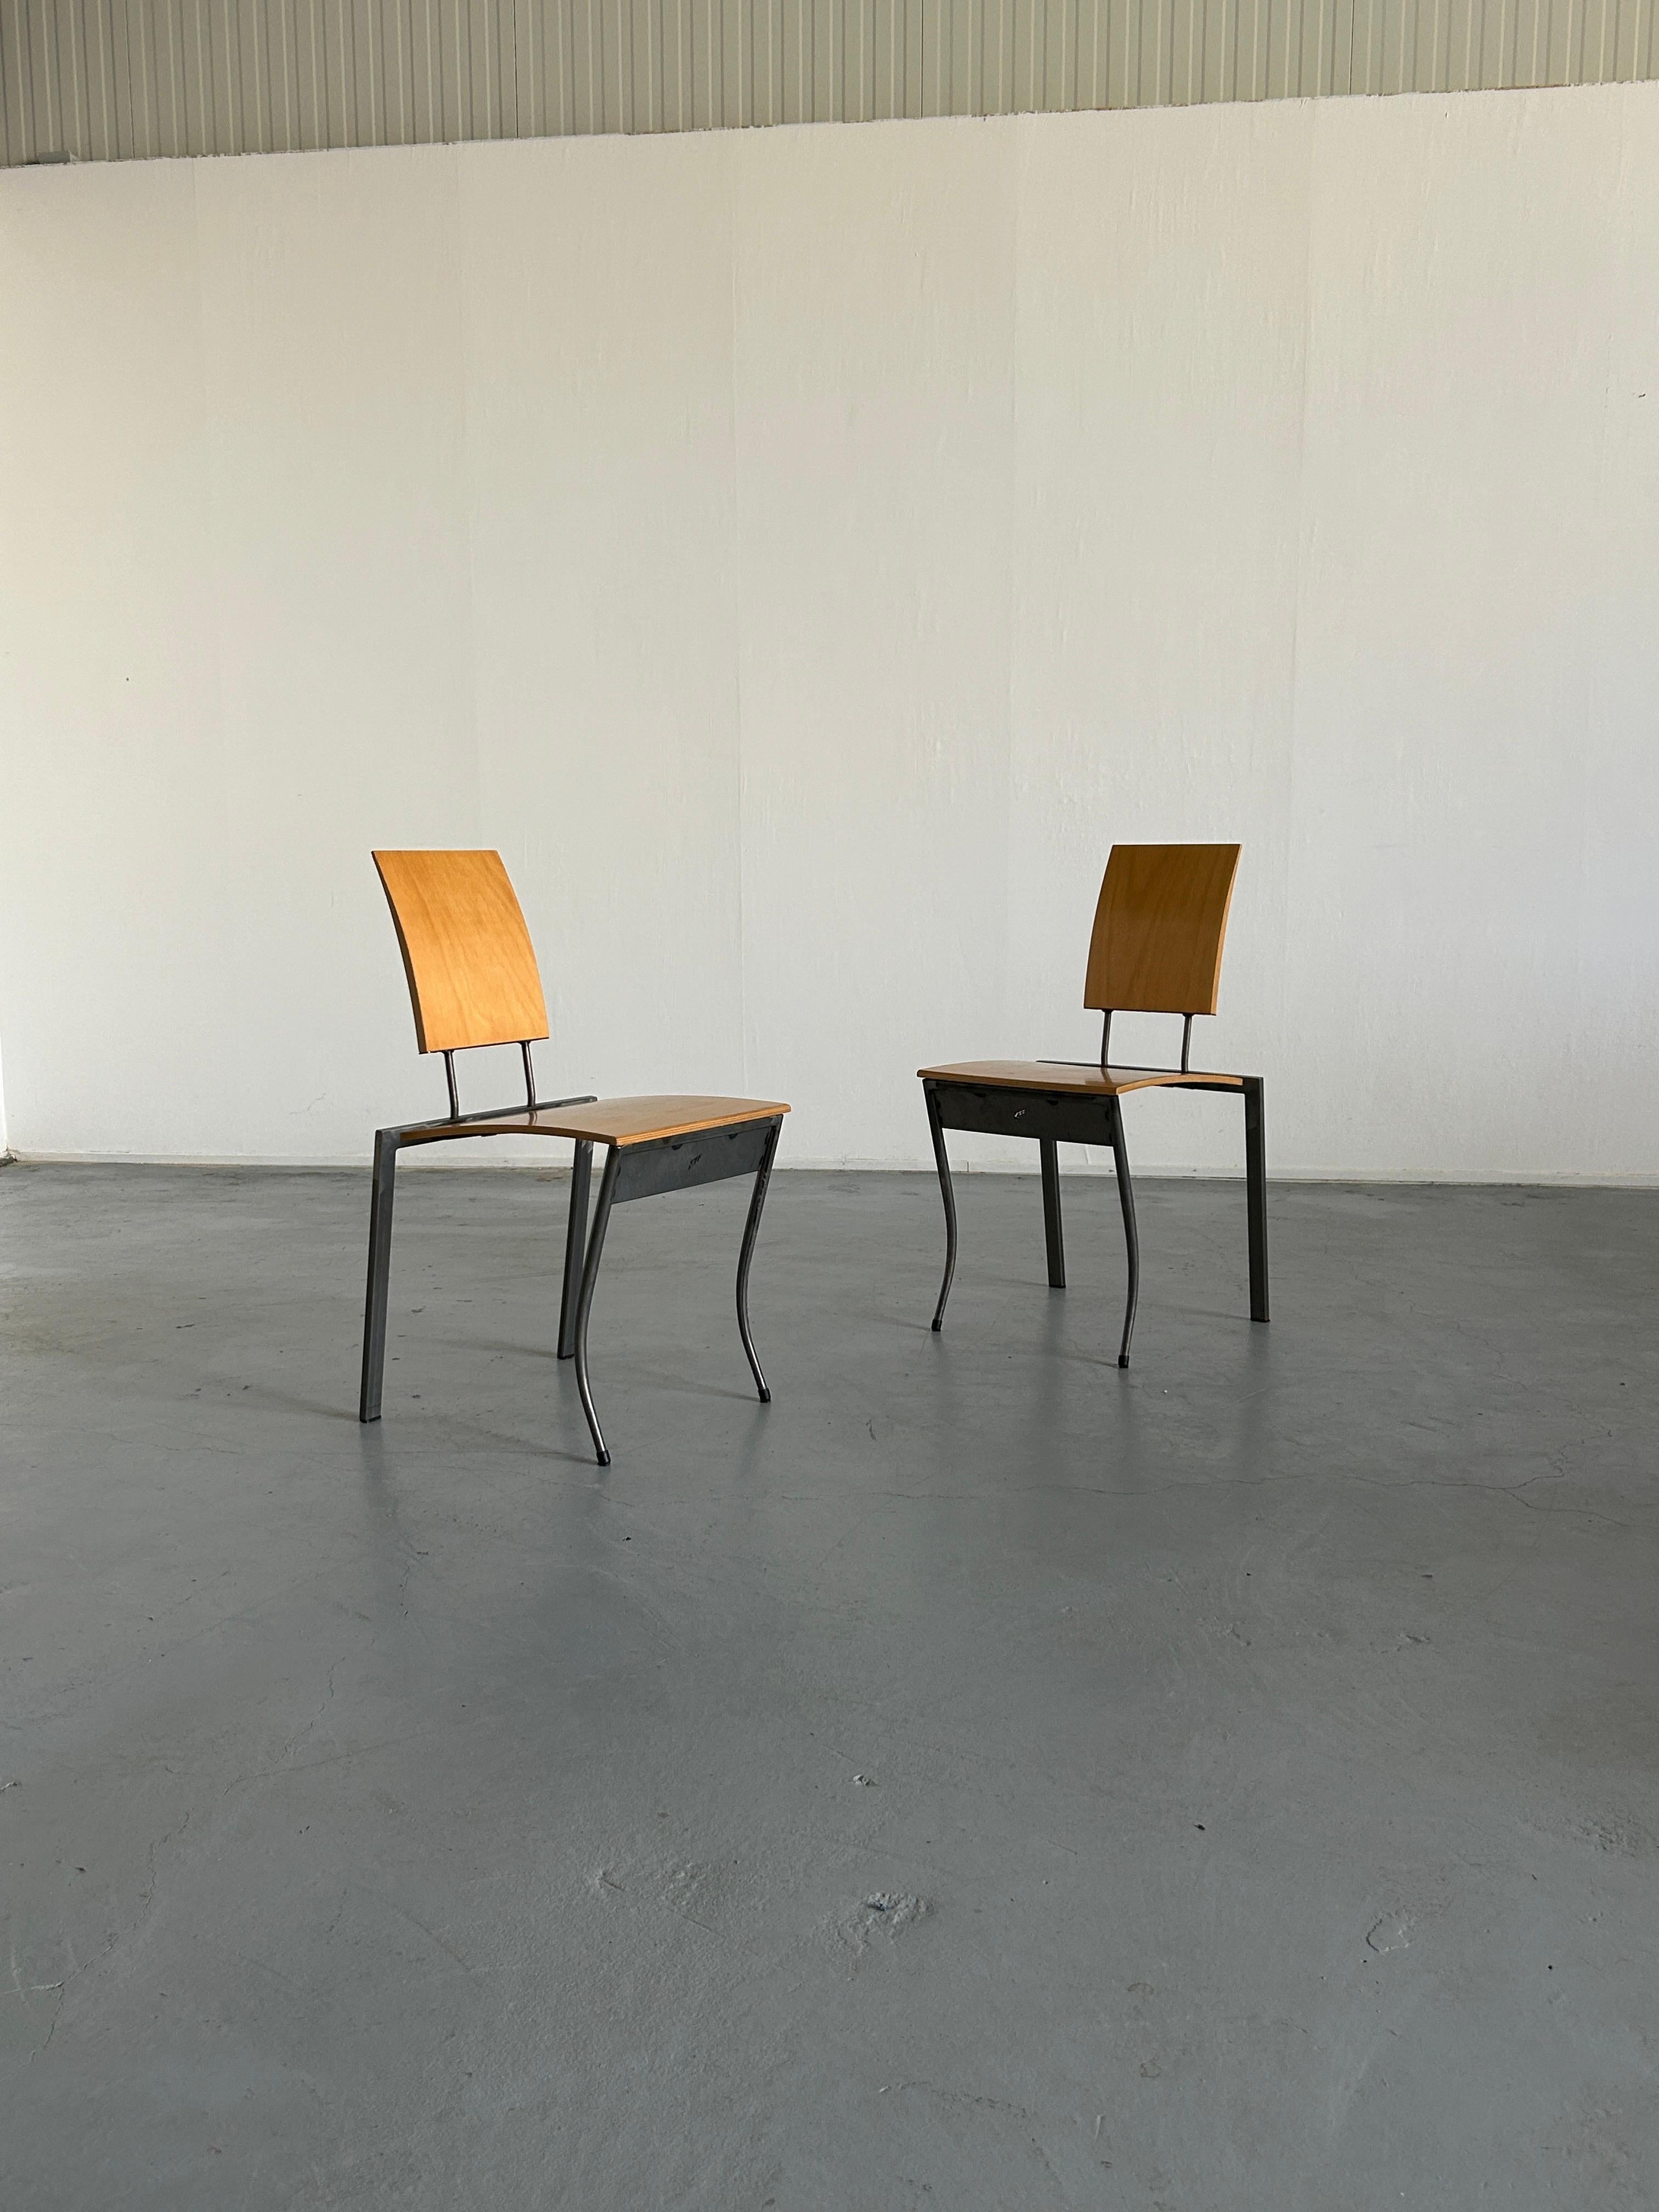 Two steel and plywood postmodern chairs designed in the 1980s in Germany by Karl Friedrich Förste for KFF, his own manufacturing company.
The chair has a slim rectangular three-dimensional gazzelle-like metal frame and a flat styled plywood